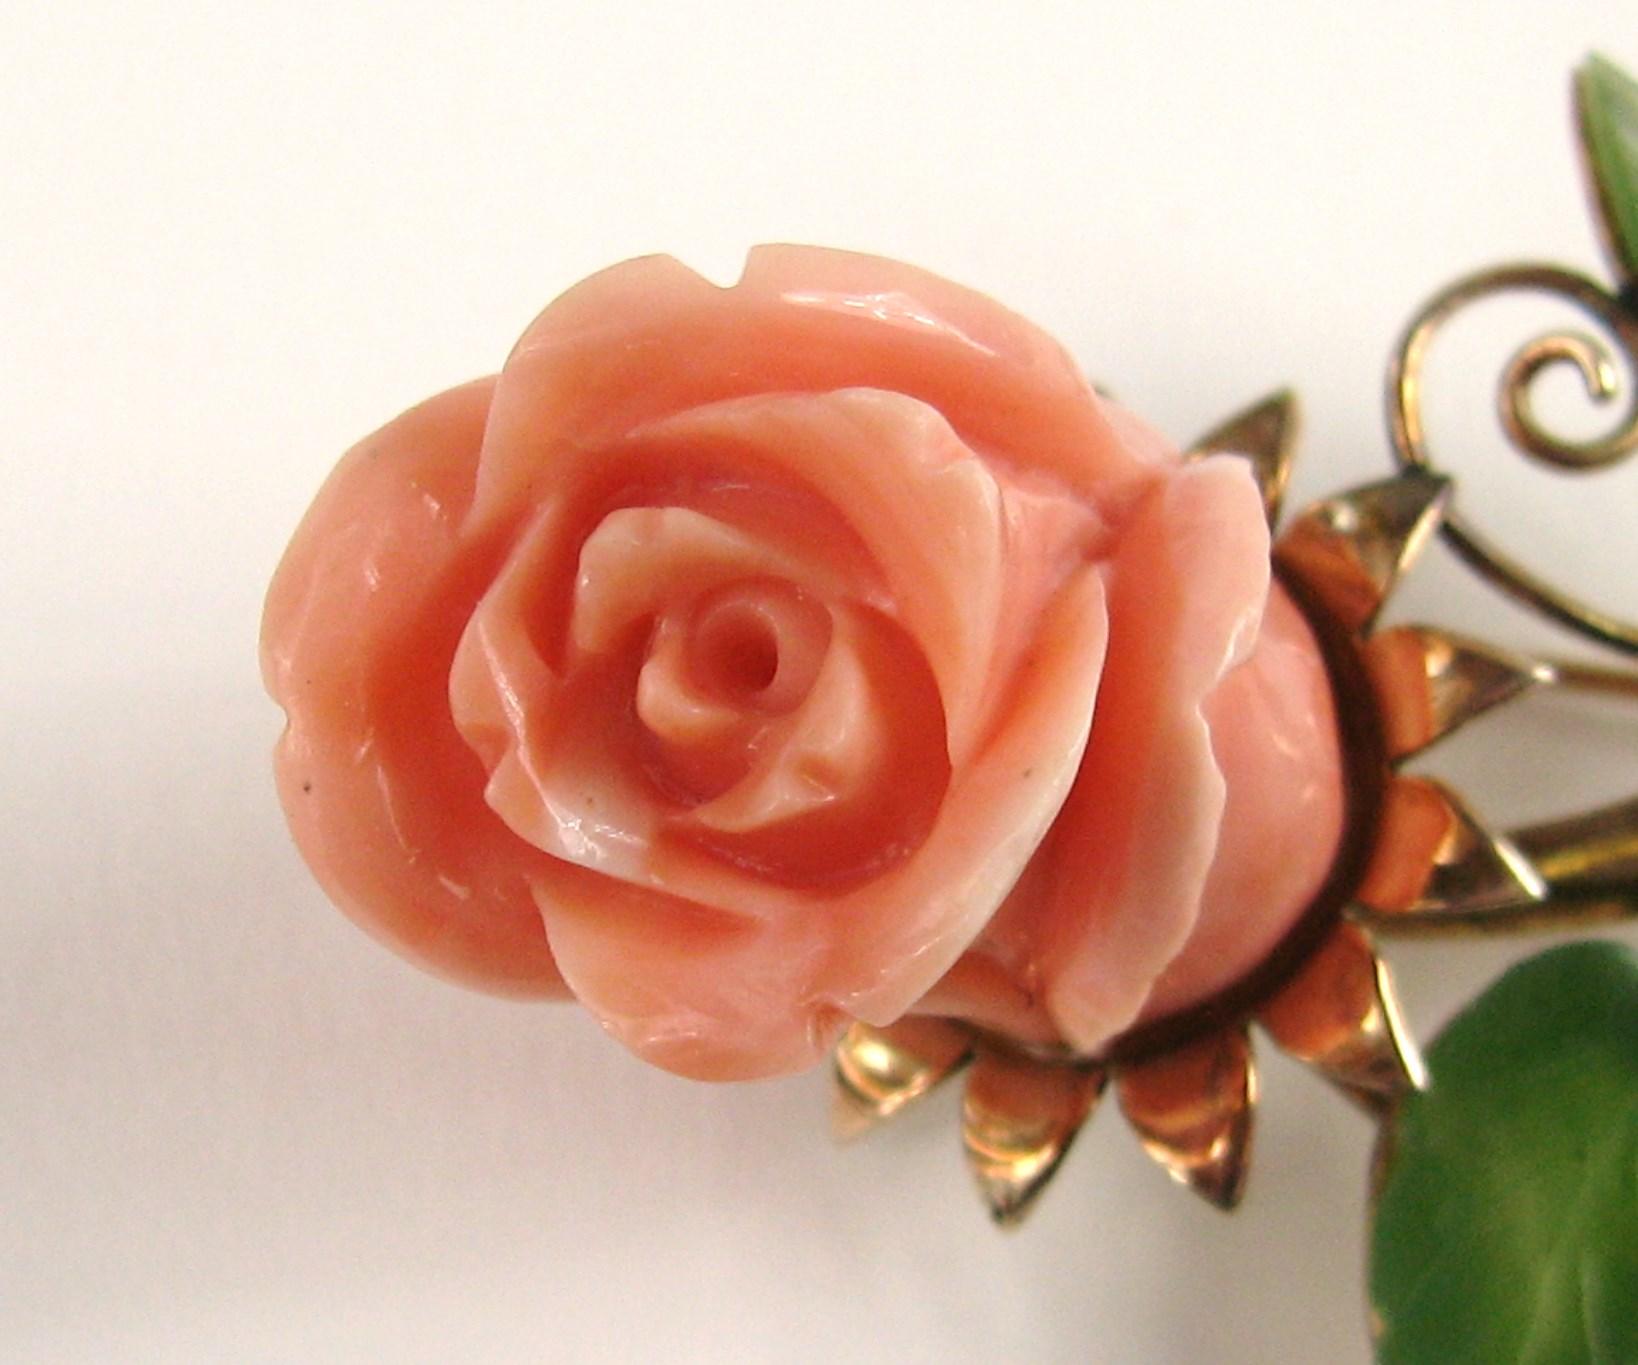 Stunning delicate rose carved out of coral with Jade leaves. Pin measuring 2.45 in top to bottom 1.47 wide. This is out of a massive collection of Contemporary designer & Vintage clothing as well as Hopi, Zuni, Navajo, Southwestern, sterling silver,